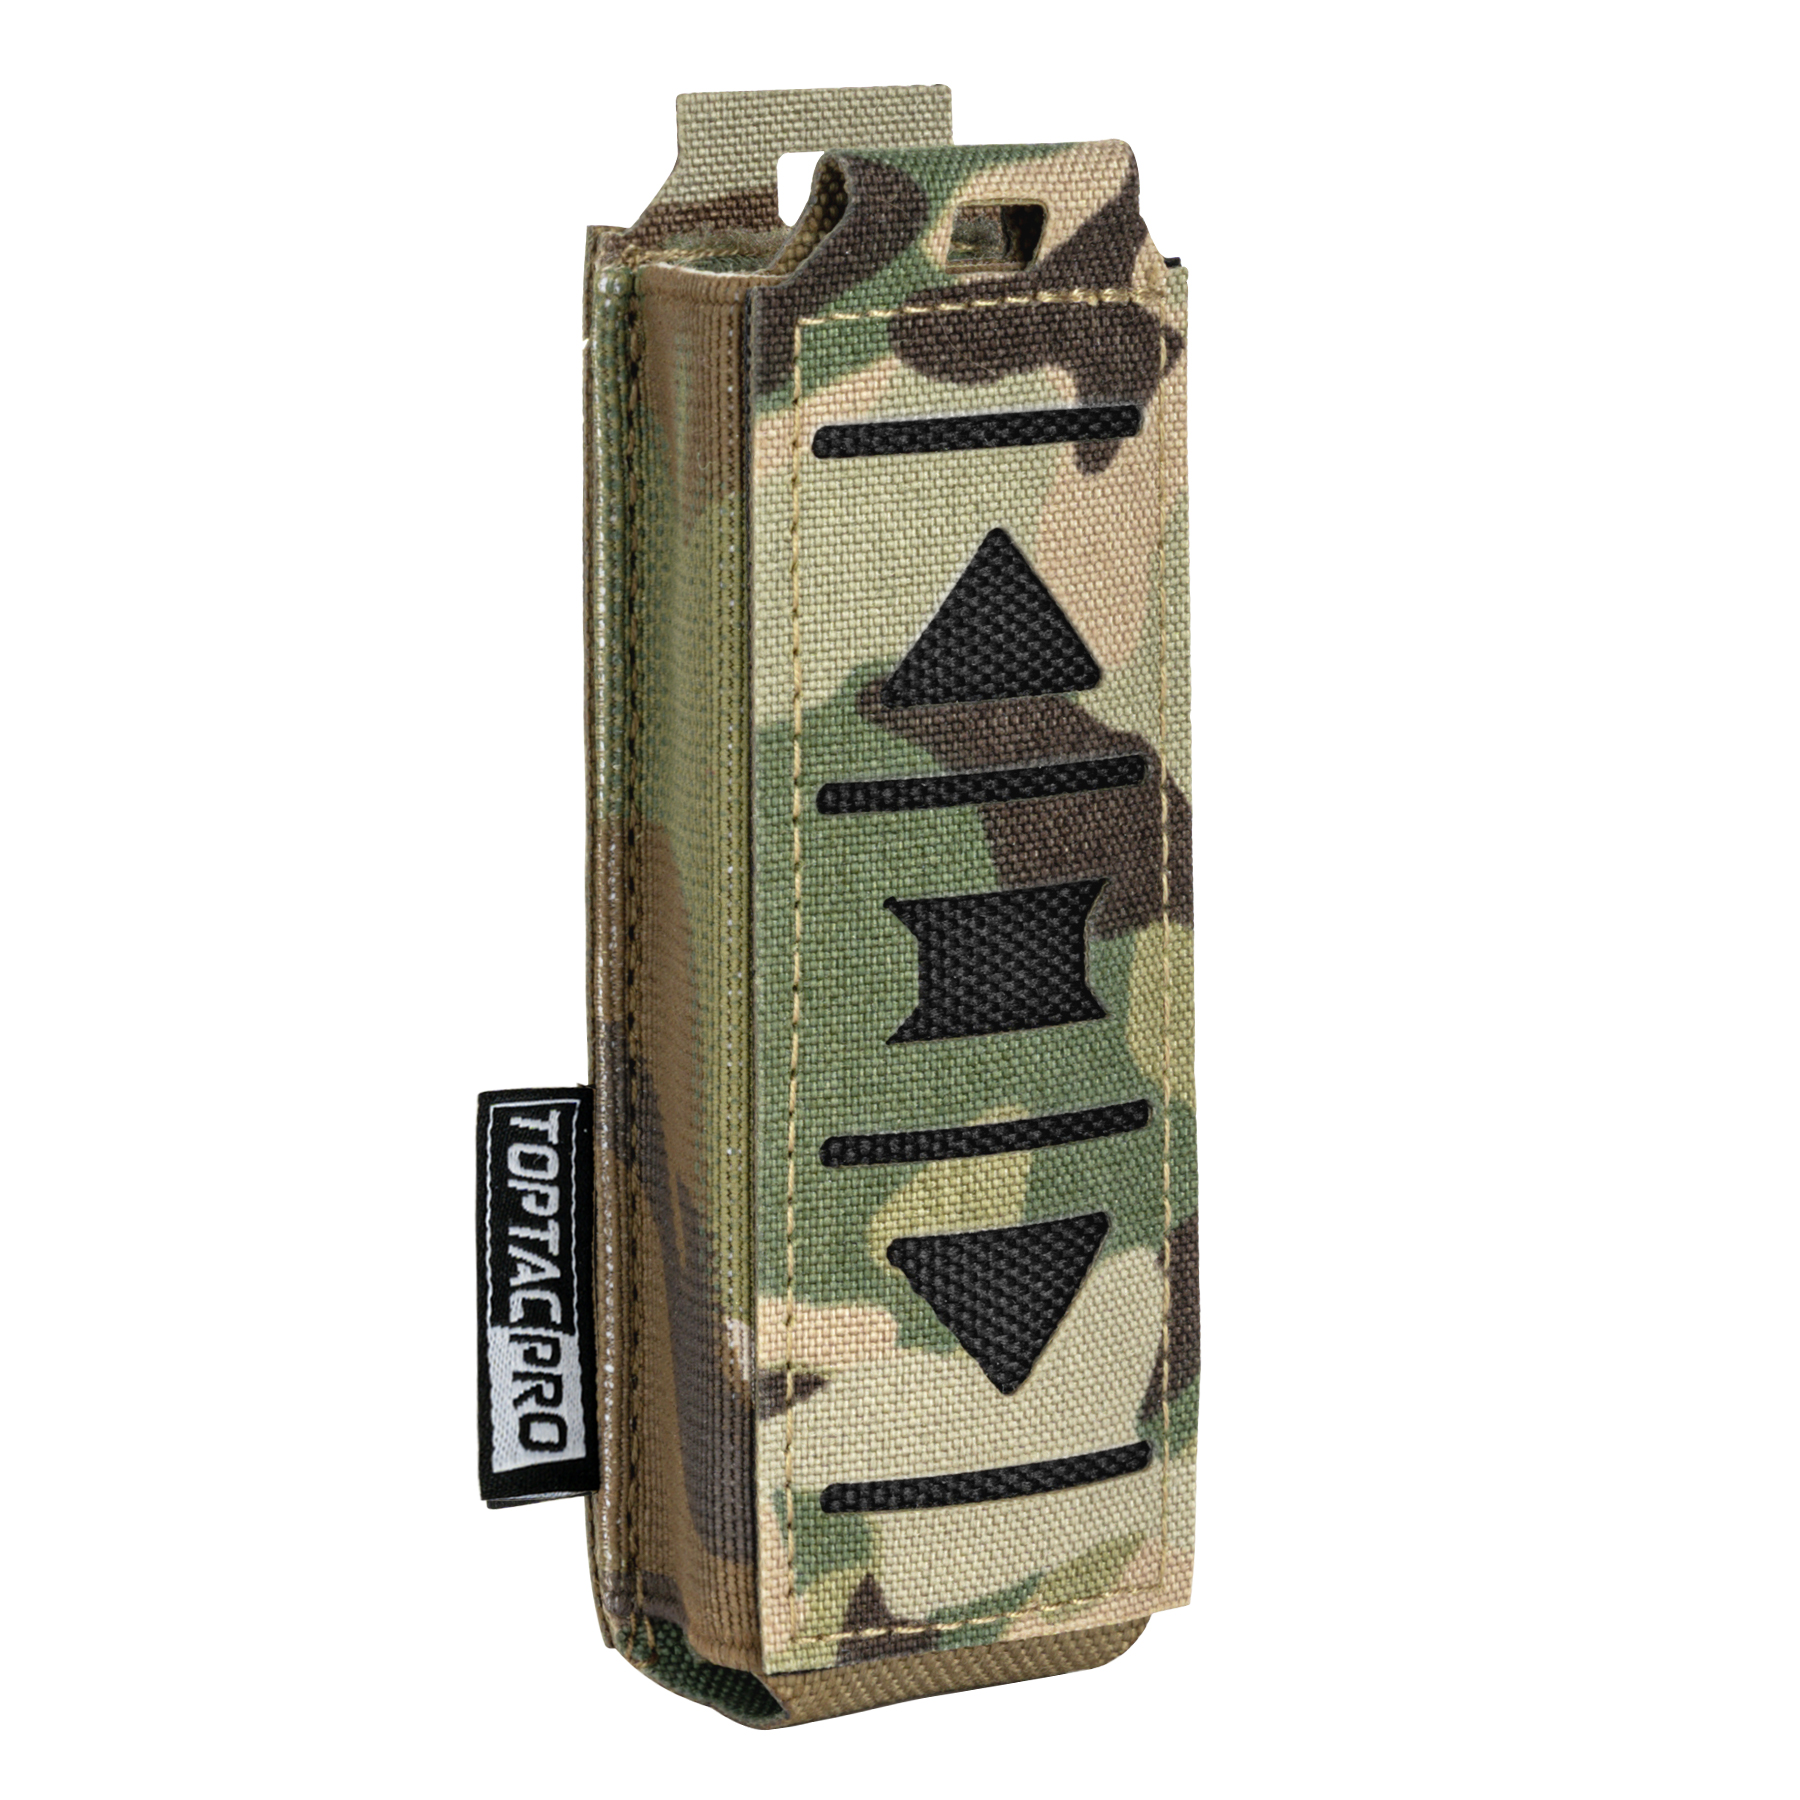 TOPTACPRO Tactical Mag Pouch 9mm MOLLE Single Mag Carrier Laser Cut 9mm Pouch 8513-IDOGEAR INDUSTRIAL